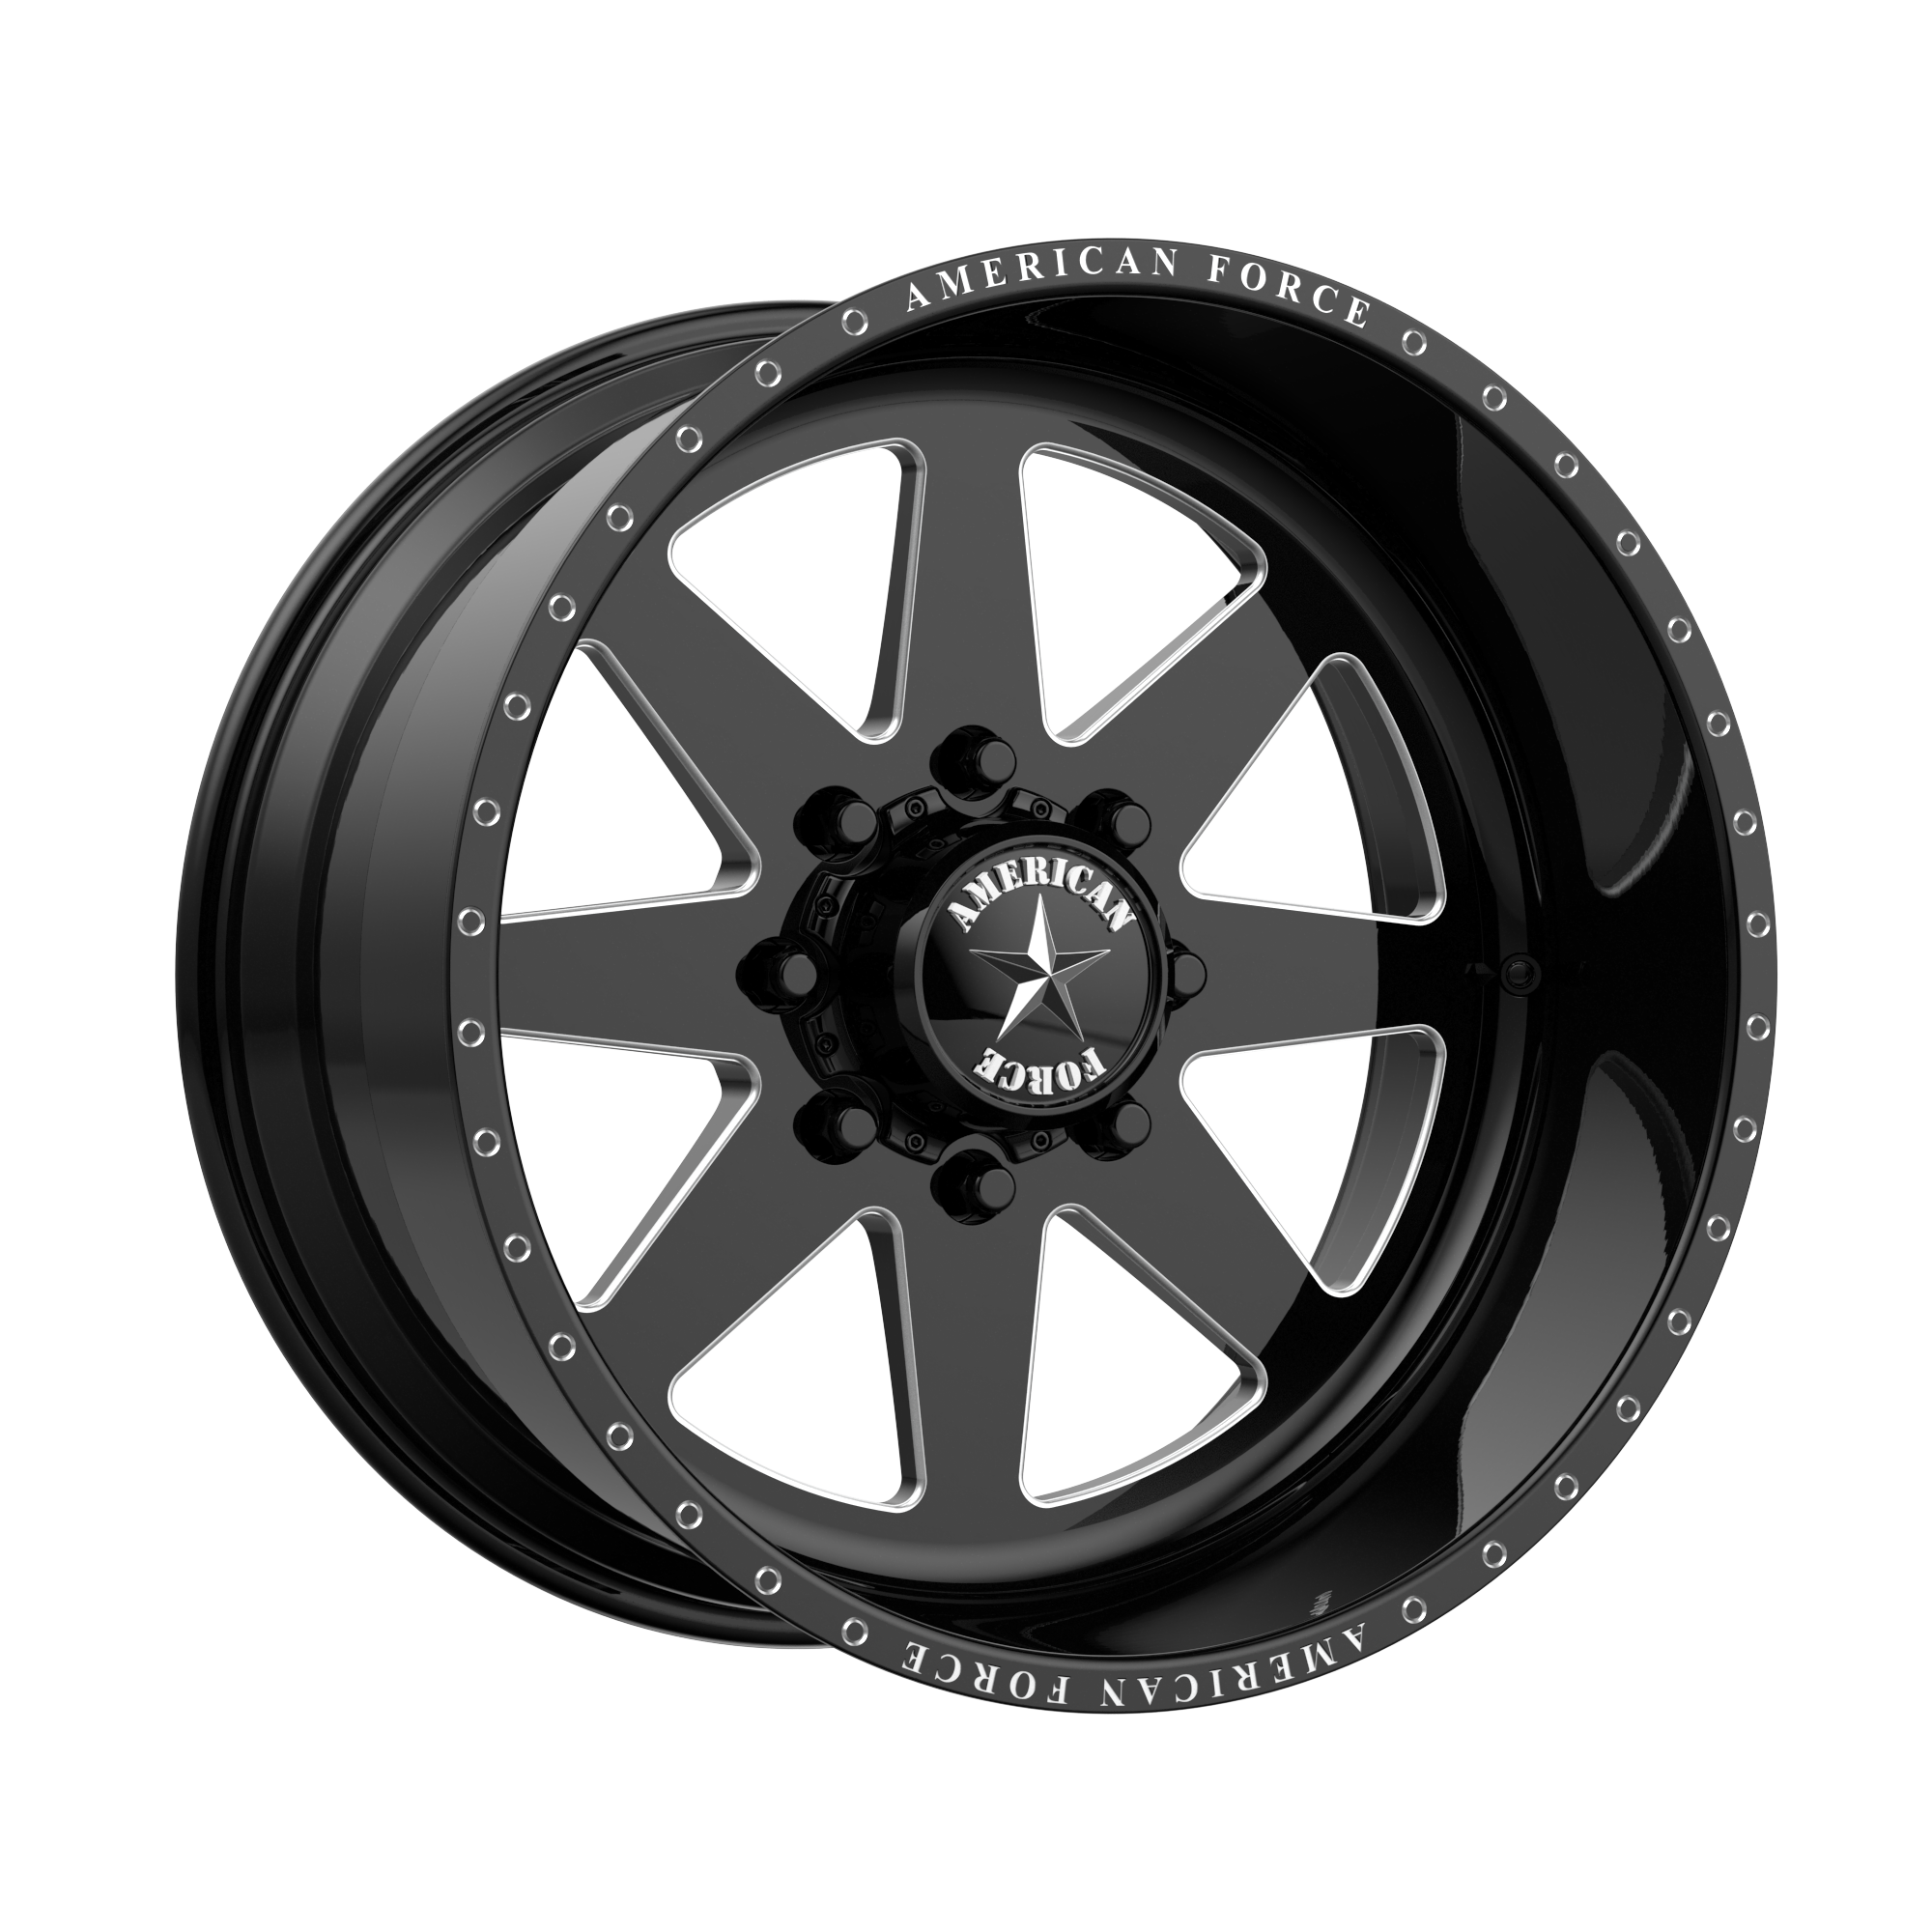 INDEPENDENCE SS 20x10 5x127.00 GLOSS BLACK MACHINED (-18 mm) - Tires and Engine Performance